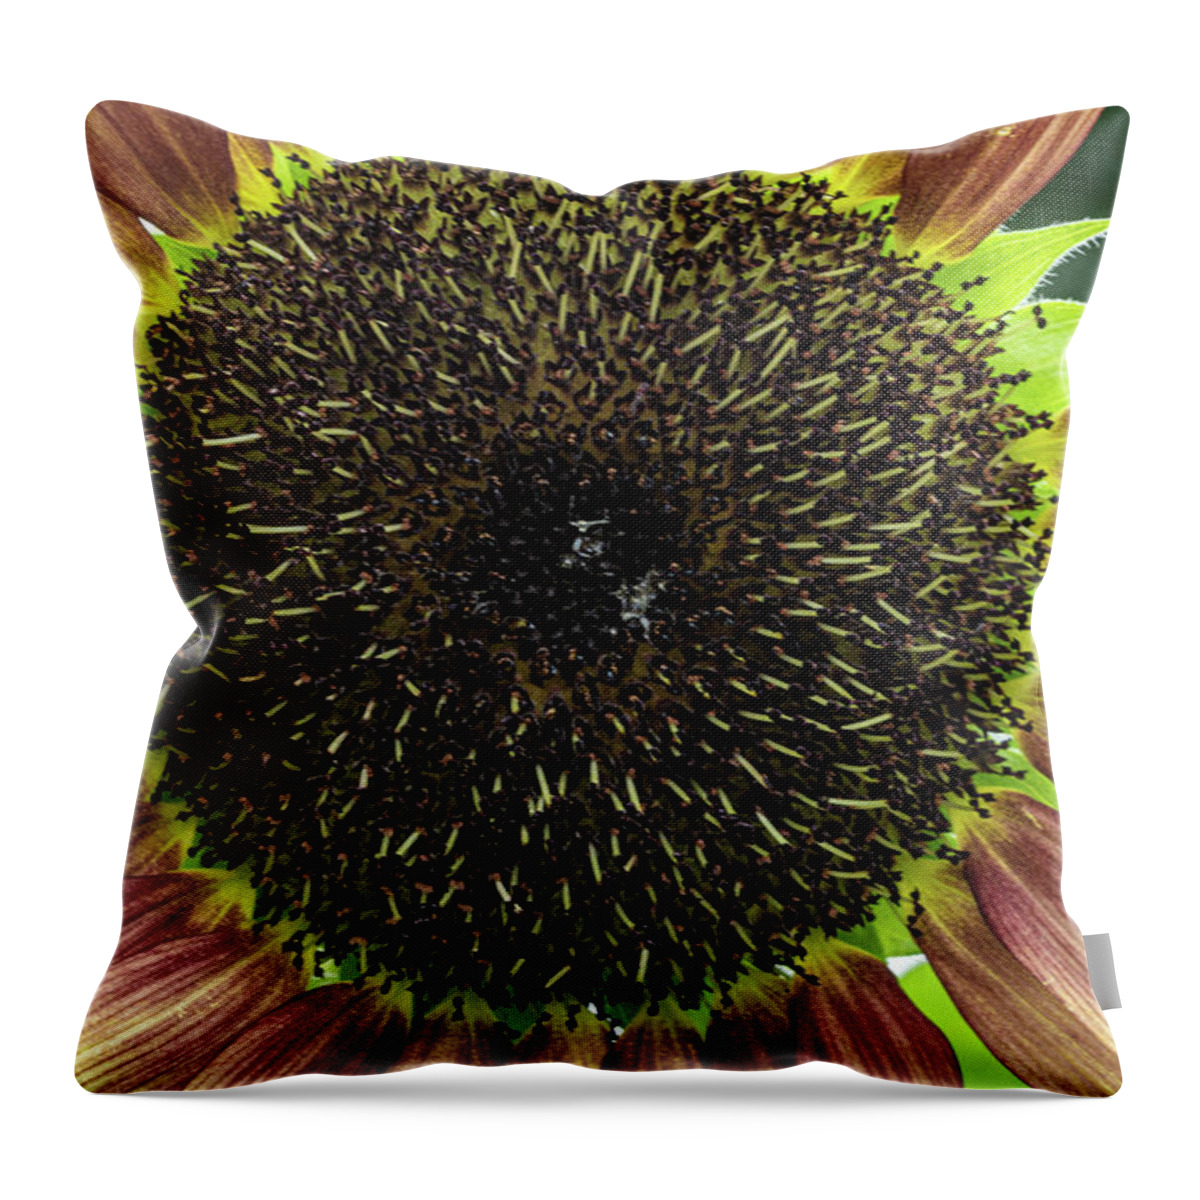 Yellow Red Flower Throw Pillow featuring the photograph Yellow and Red Flower by David Morehead